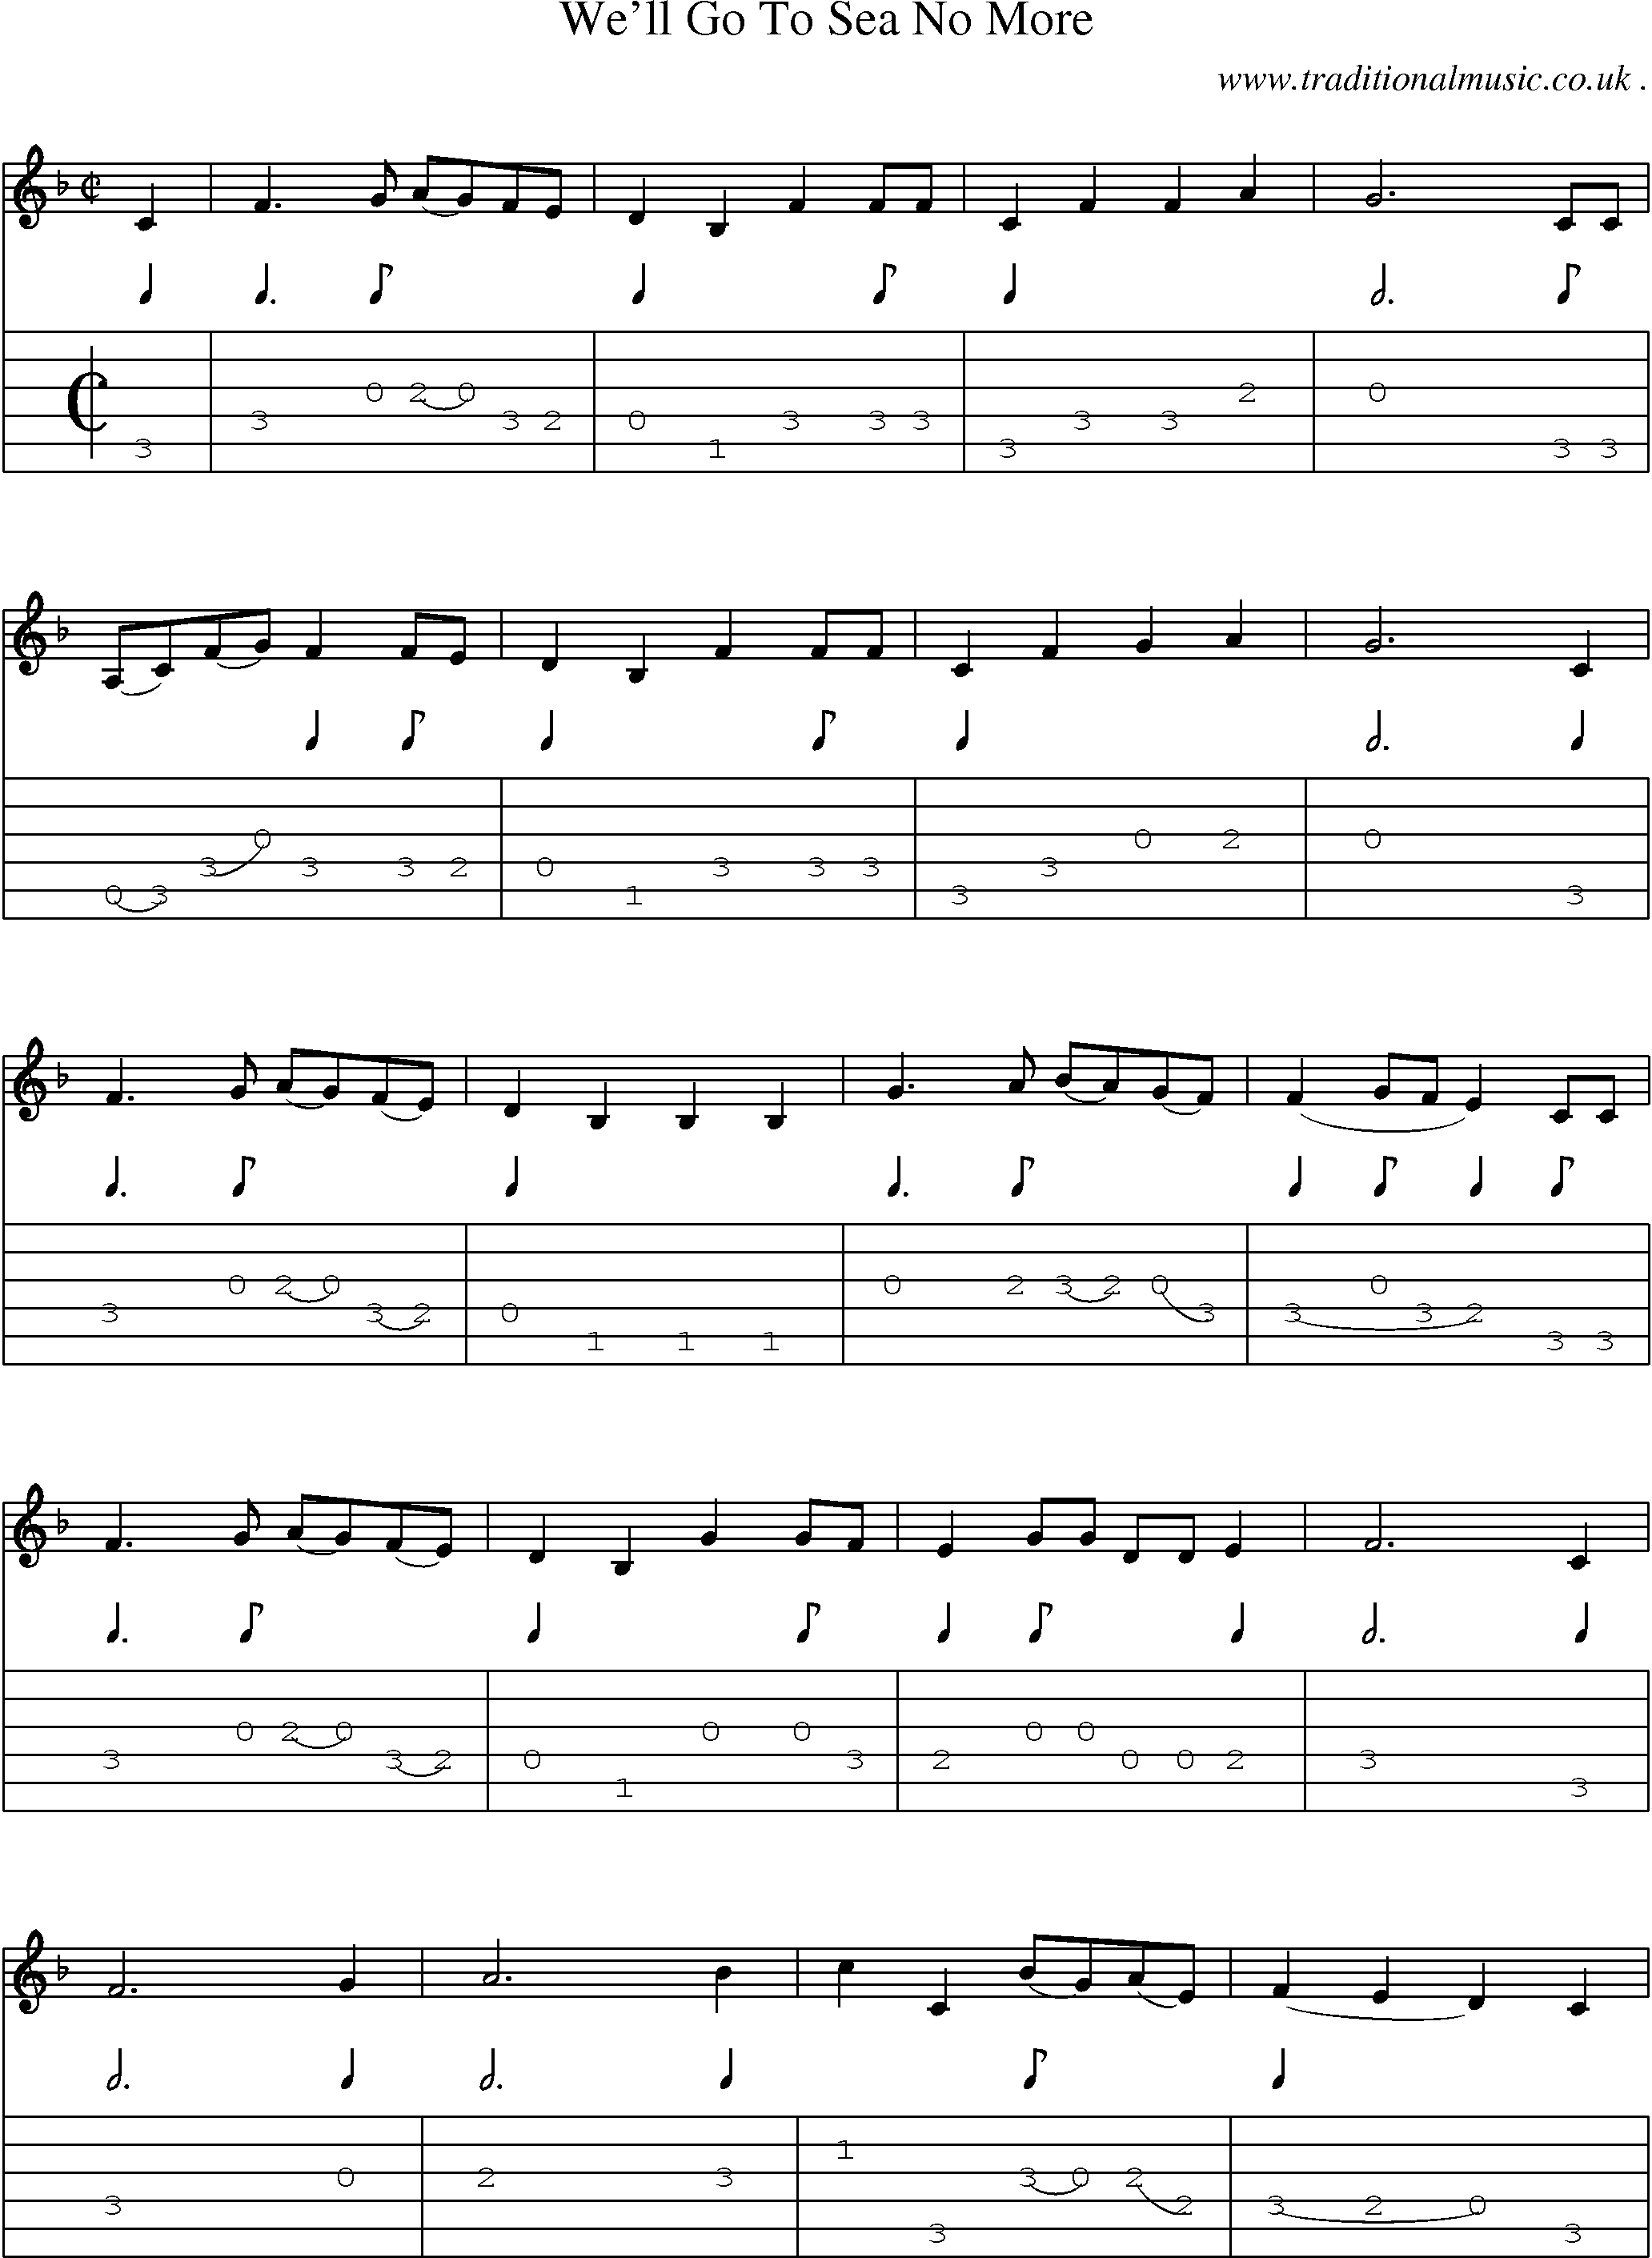 Sheet-Music and Guitar Tabs for Well Go To Sea No More